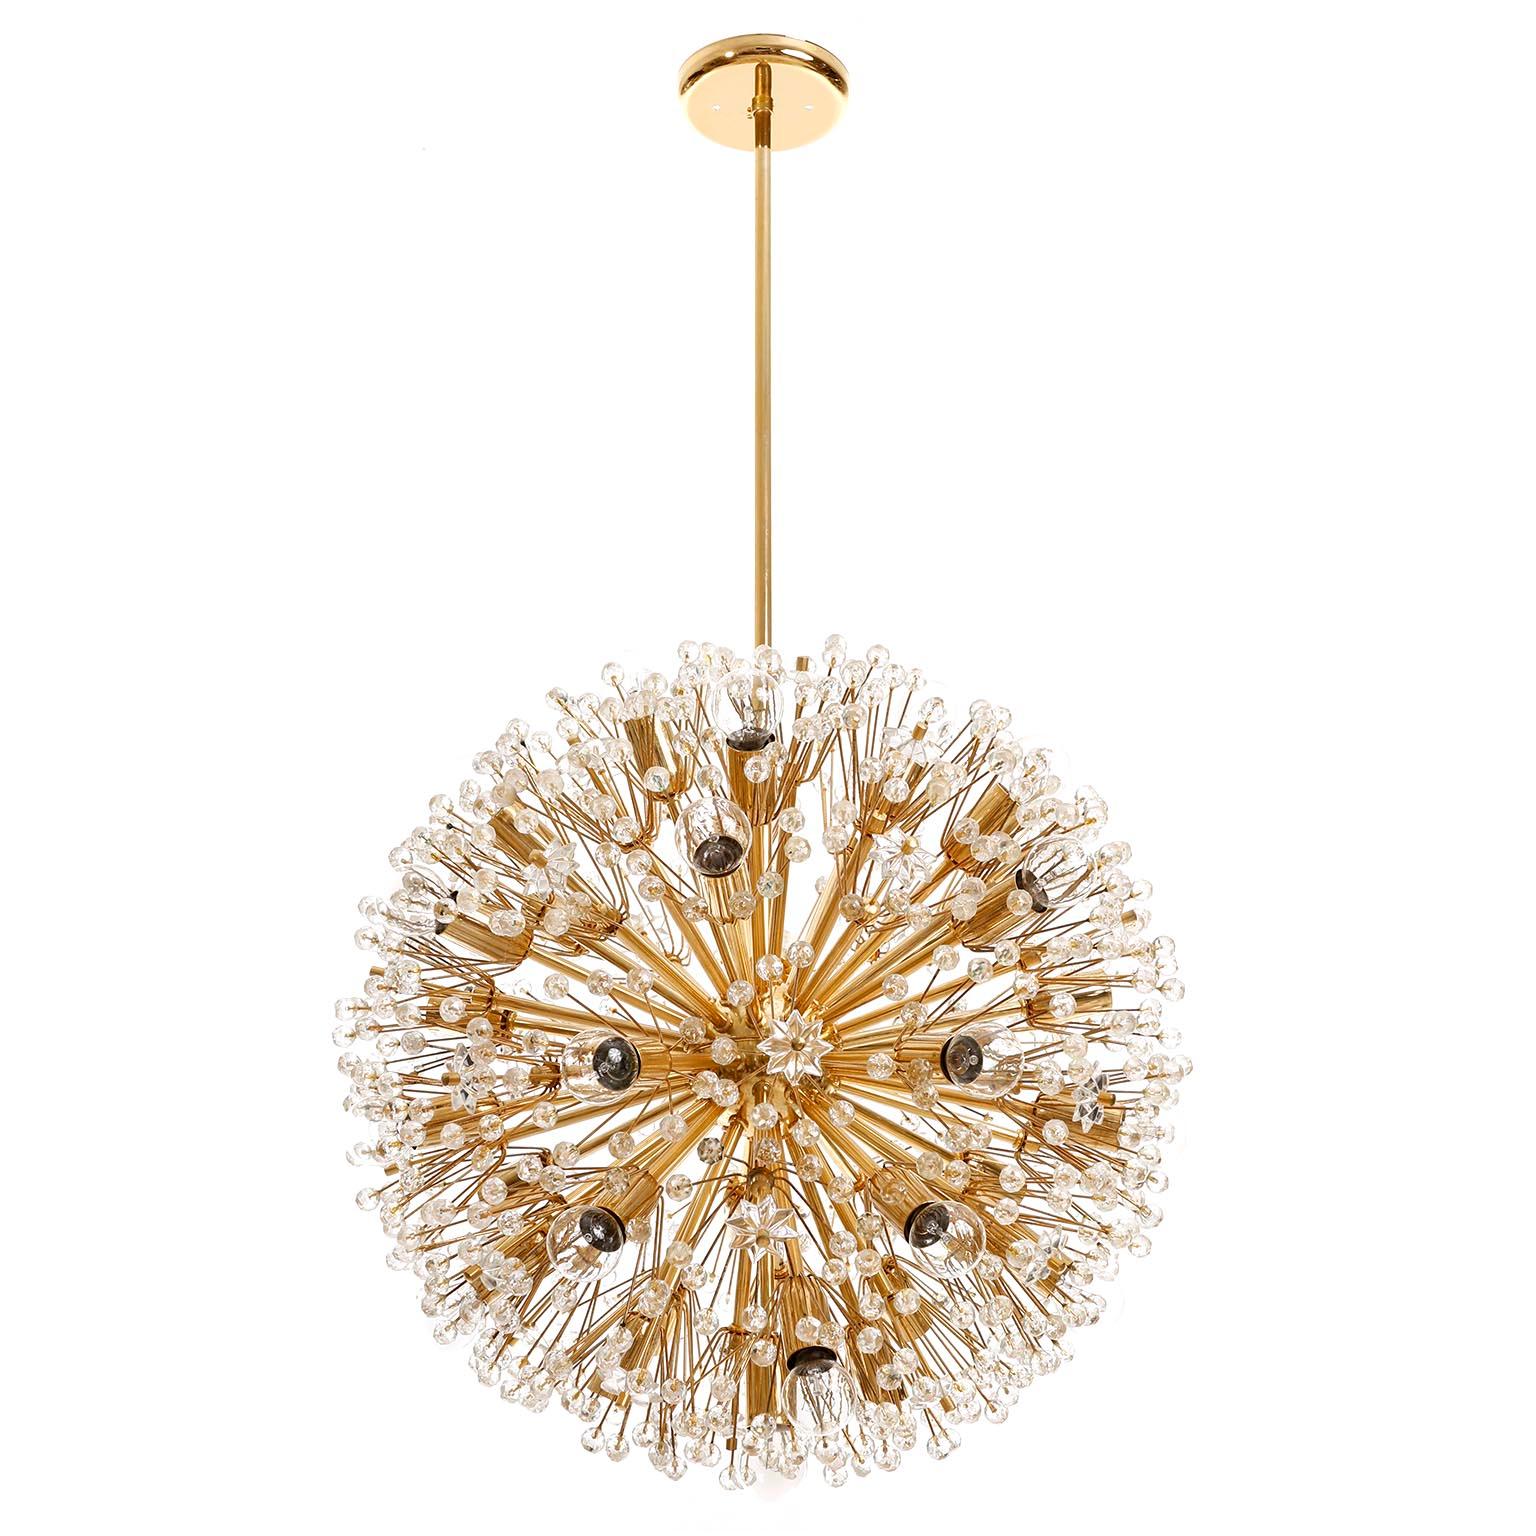 A large Sputnik chandelier designed by Emil Stejnar and manufactured in midcentury, circa 1970.
This beautiful light fixture is made of a 24-carat gold plated / gilt / gild brass frame which is decorated with cut glass in the form of beads and